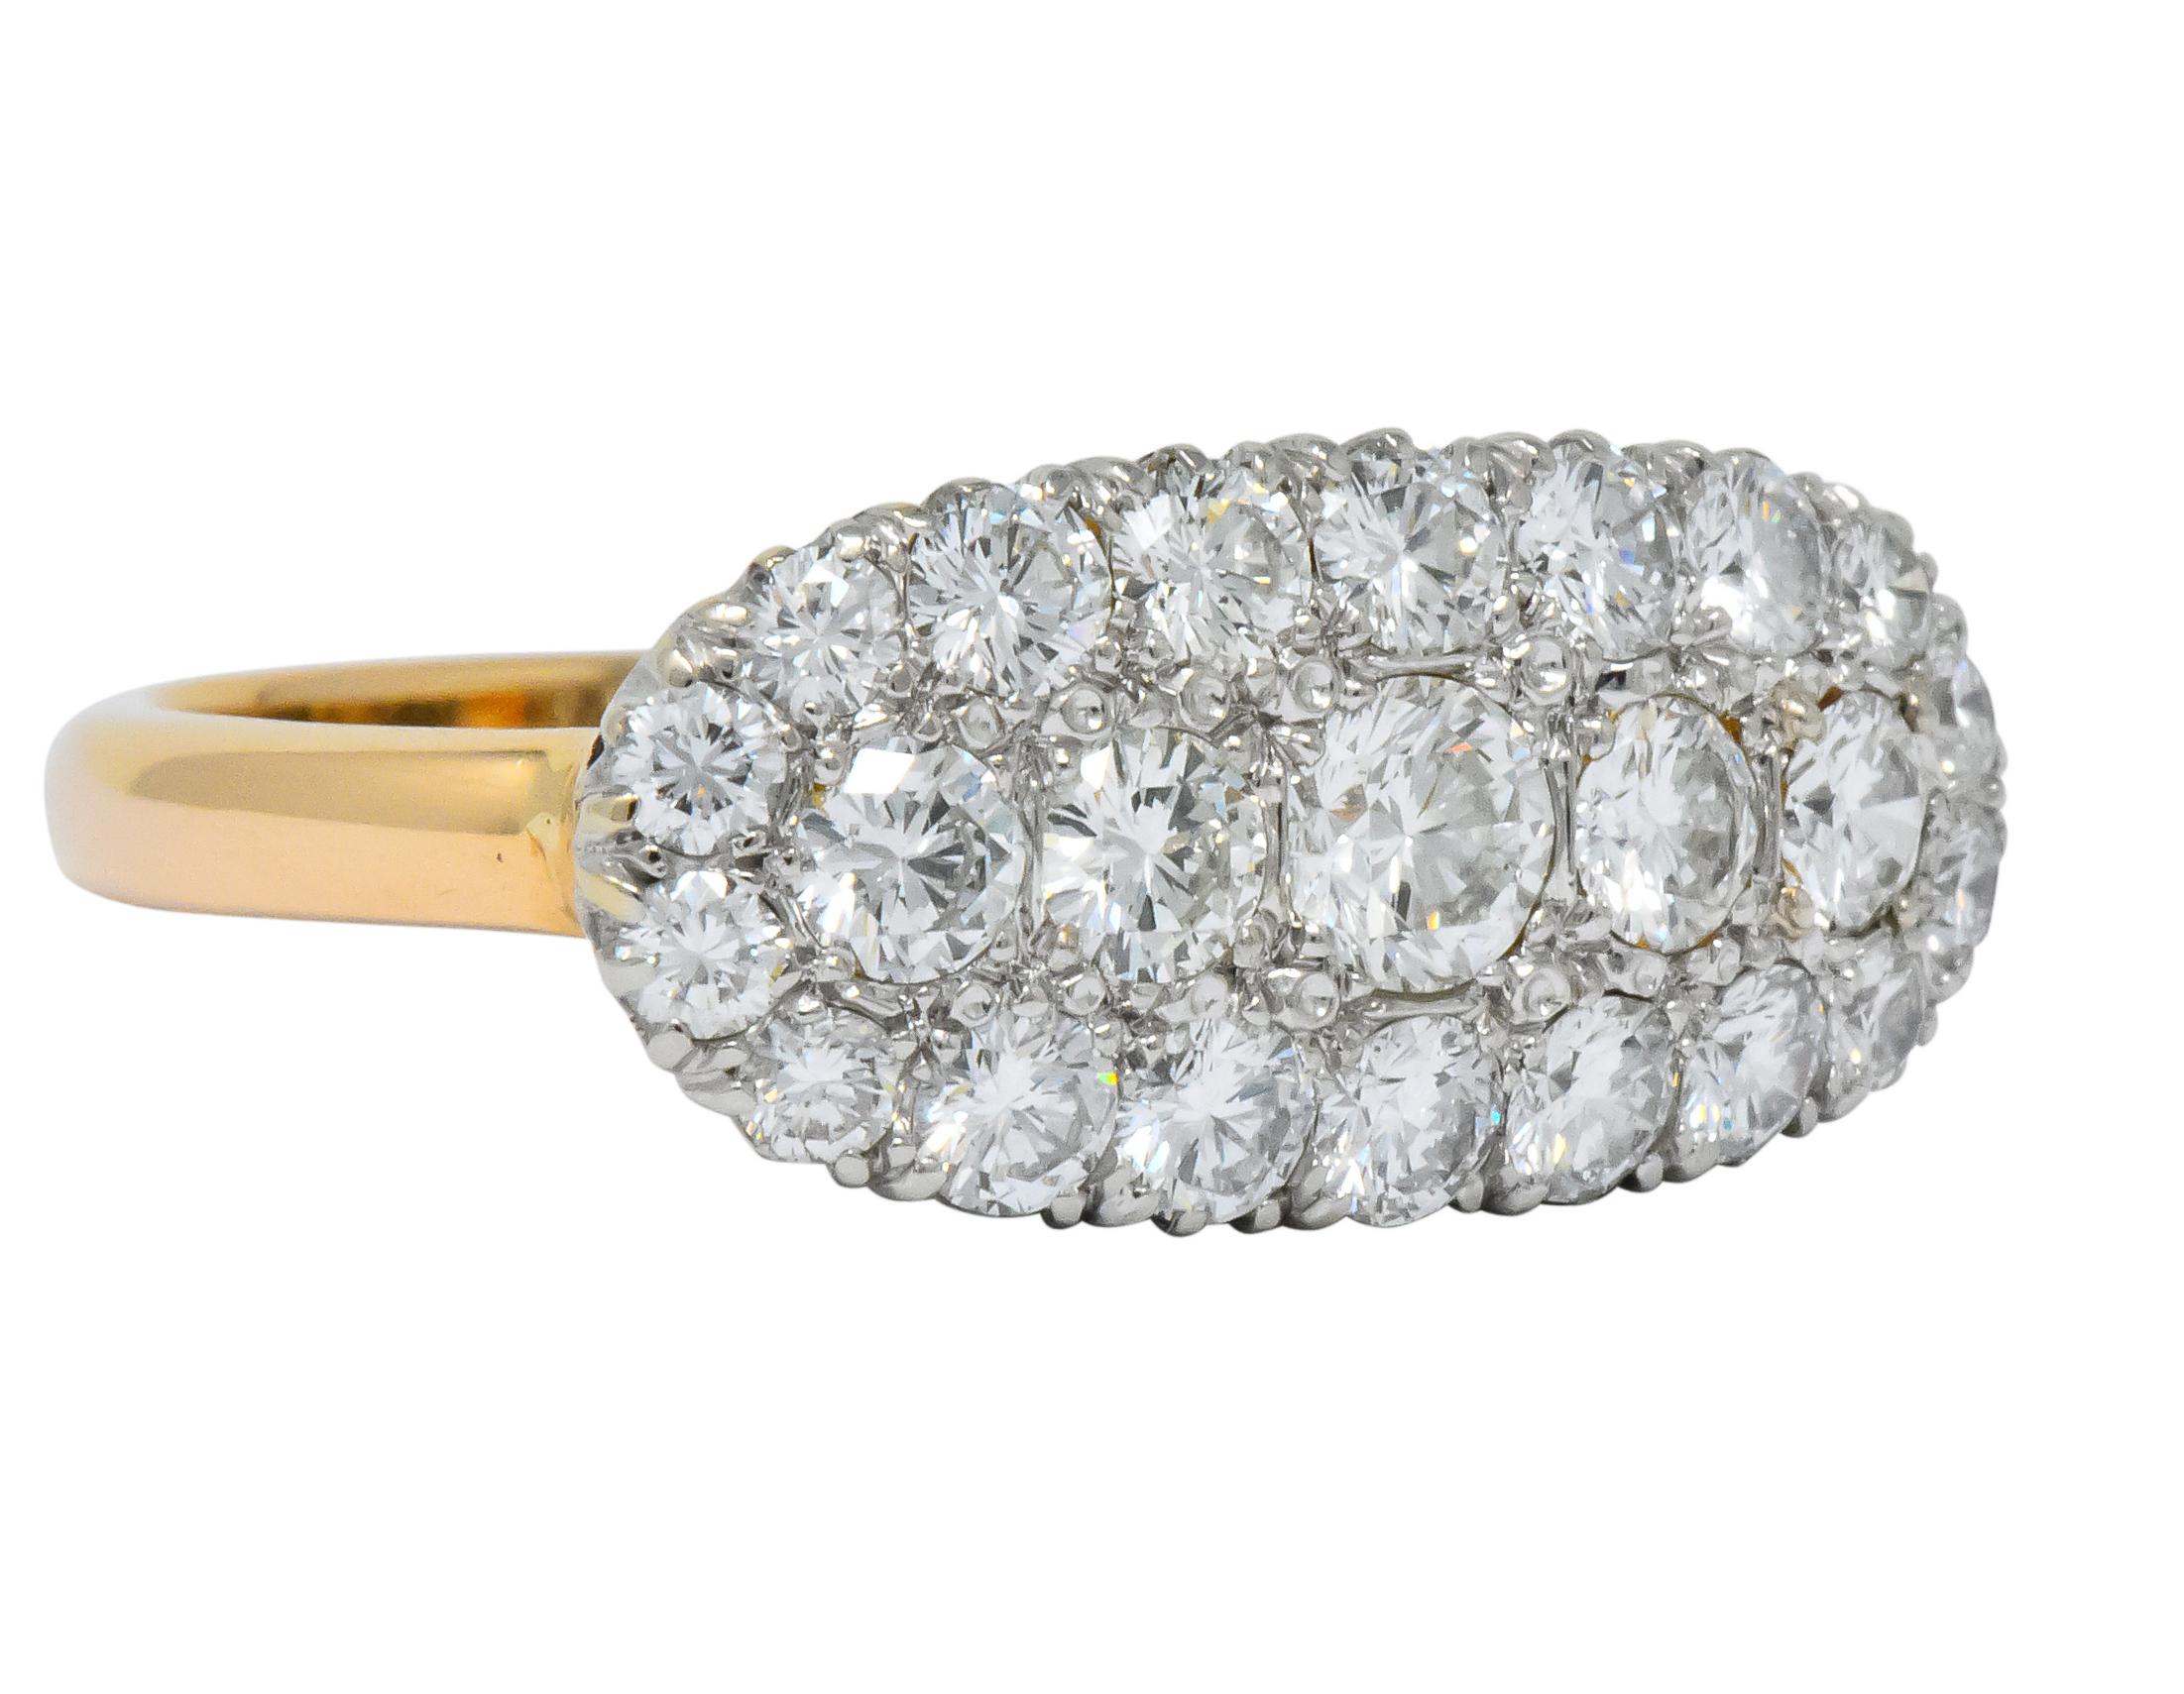 Centering a cluster of round brilliant cut diamonds

Total diamond weight approximately 2.80 carats, G-H color and VS to SI clarity

Bead set in white gold with a yellow gold shank

Stamped 14K

Ring Size: 11 1/2 & Sizable

Top measures 11.6 mm and